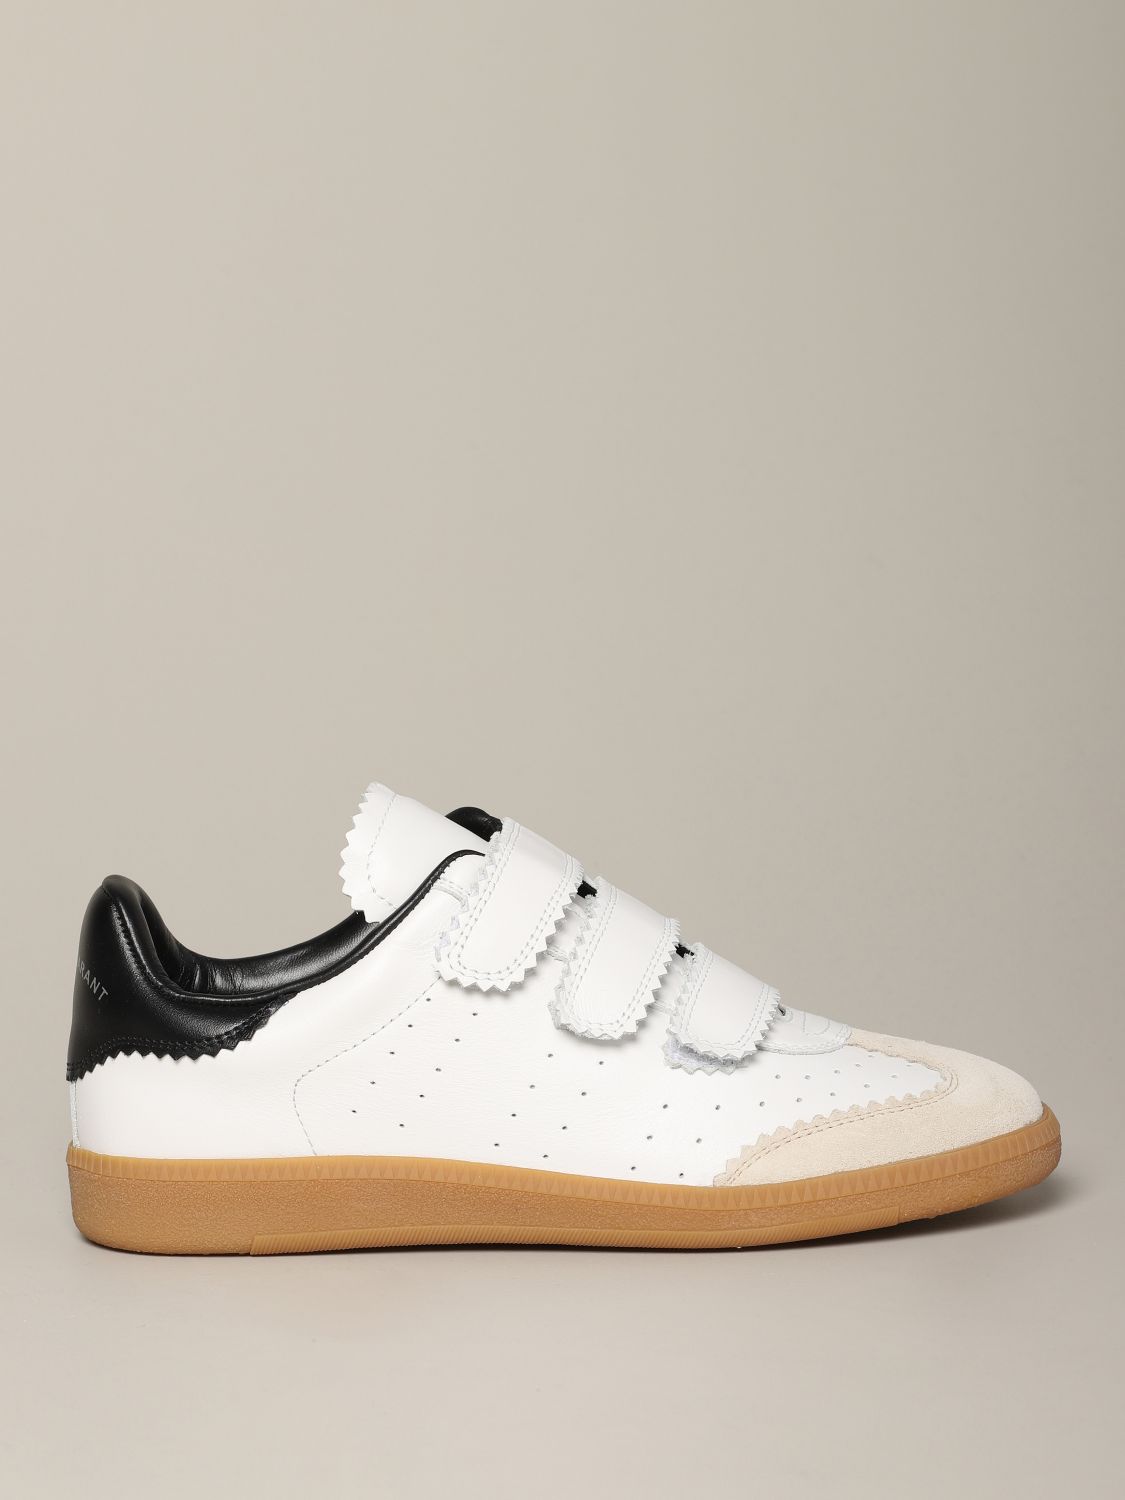 Isabel Marant Outlet: sneakers in perforated leather suede - White | Isabel Marant sneakers BK003100M007S online on GIGLIO.COM